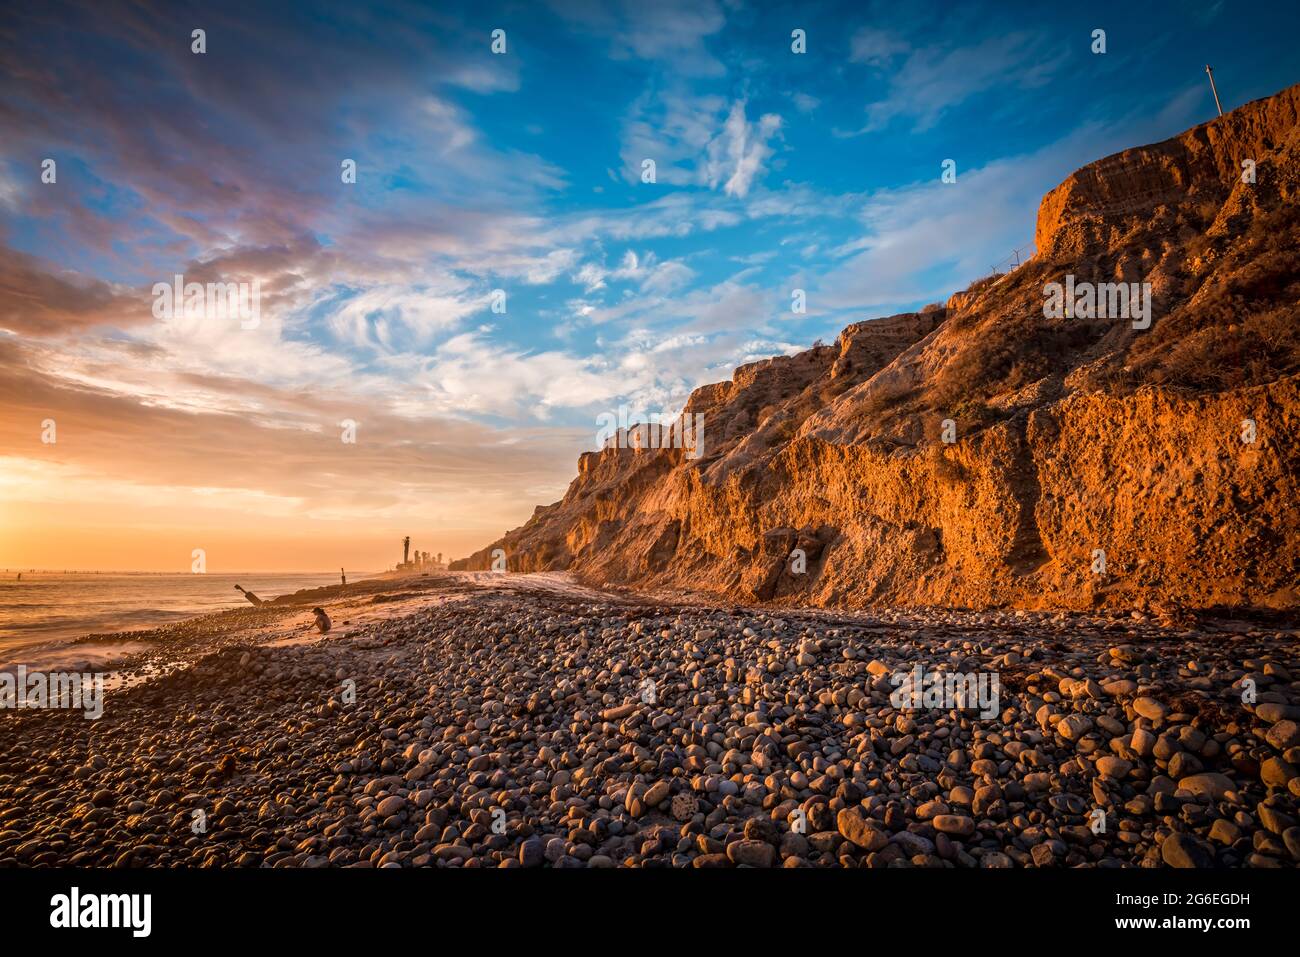 Beautiful beach sunset with sunlit bluffs and a rocky shore Stock Photo